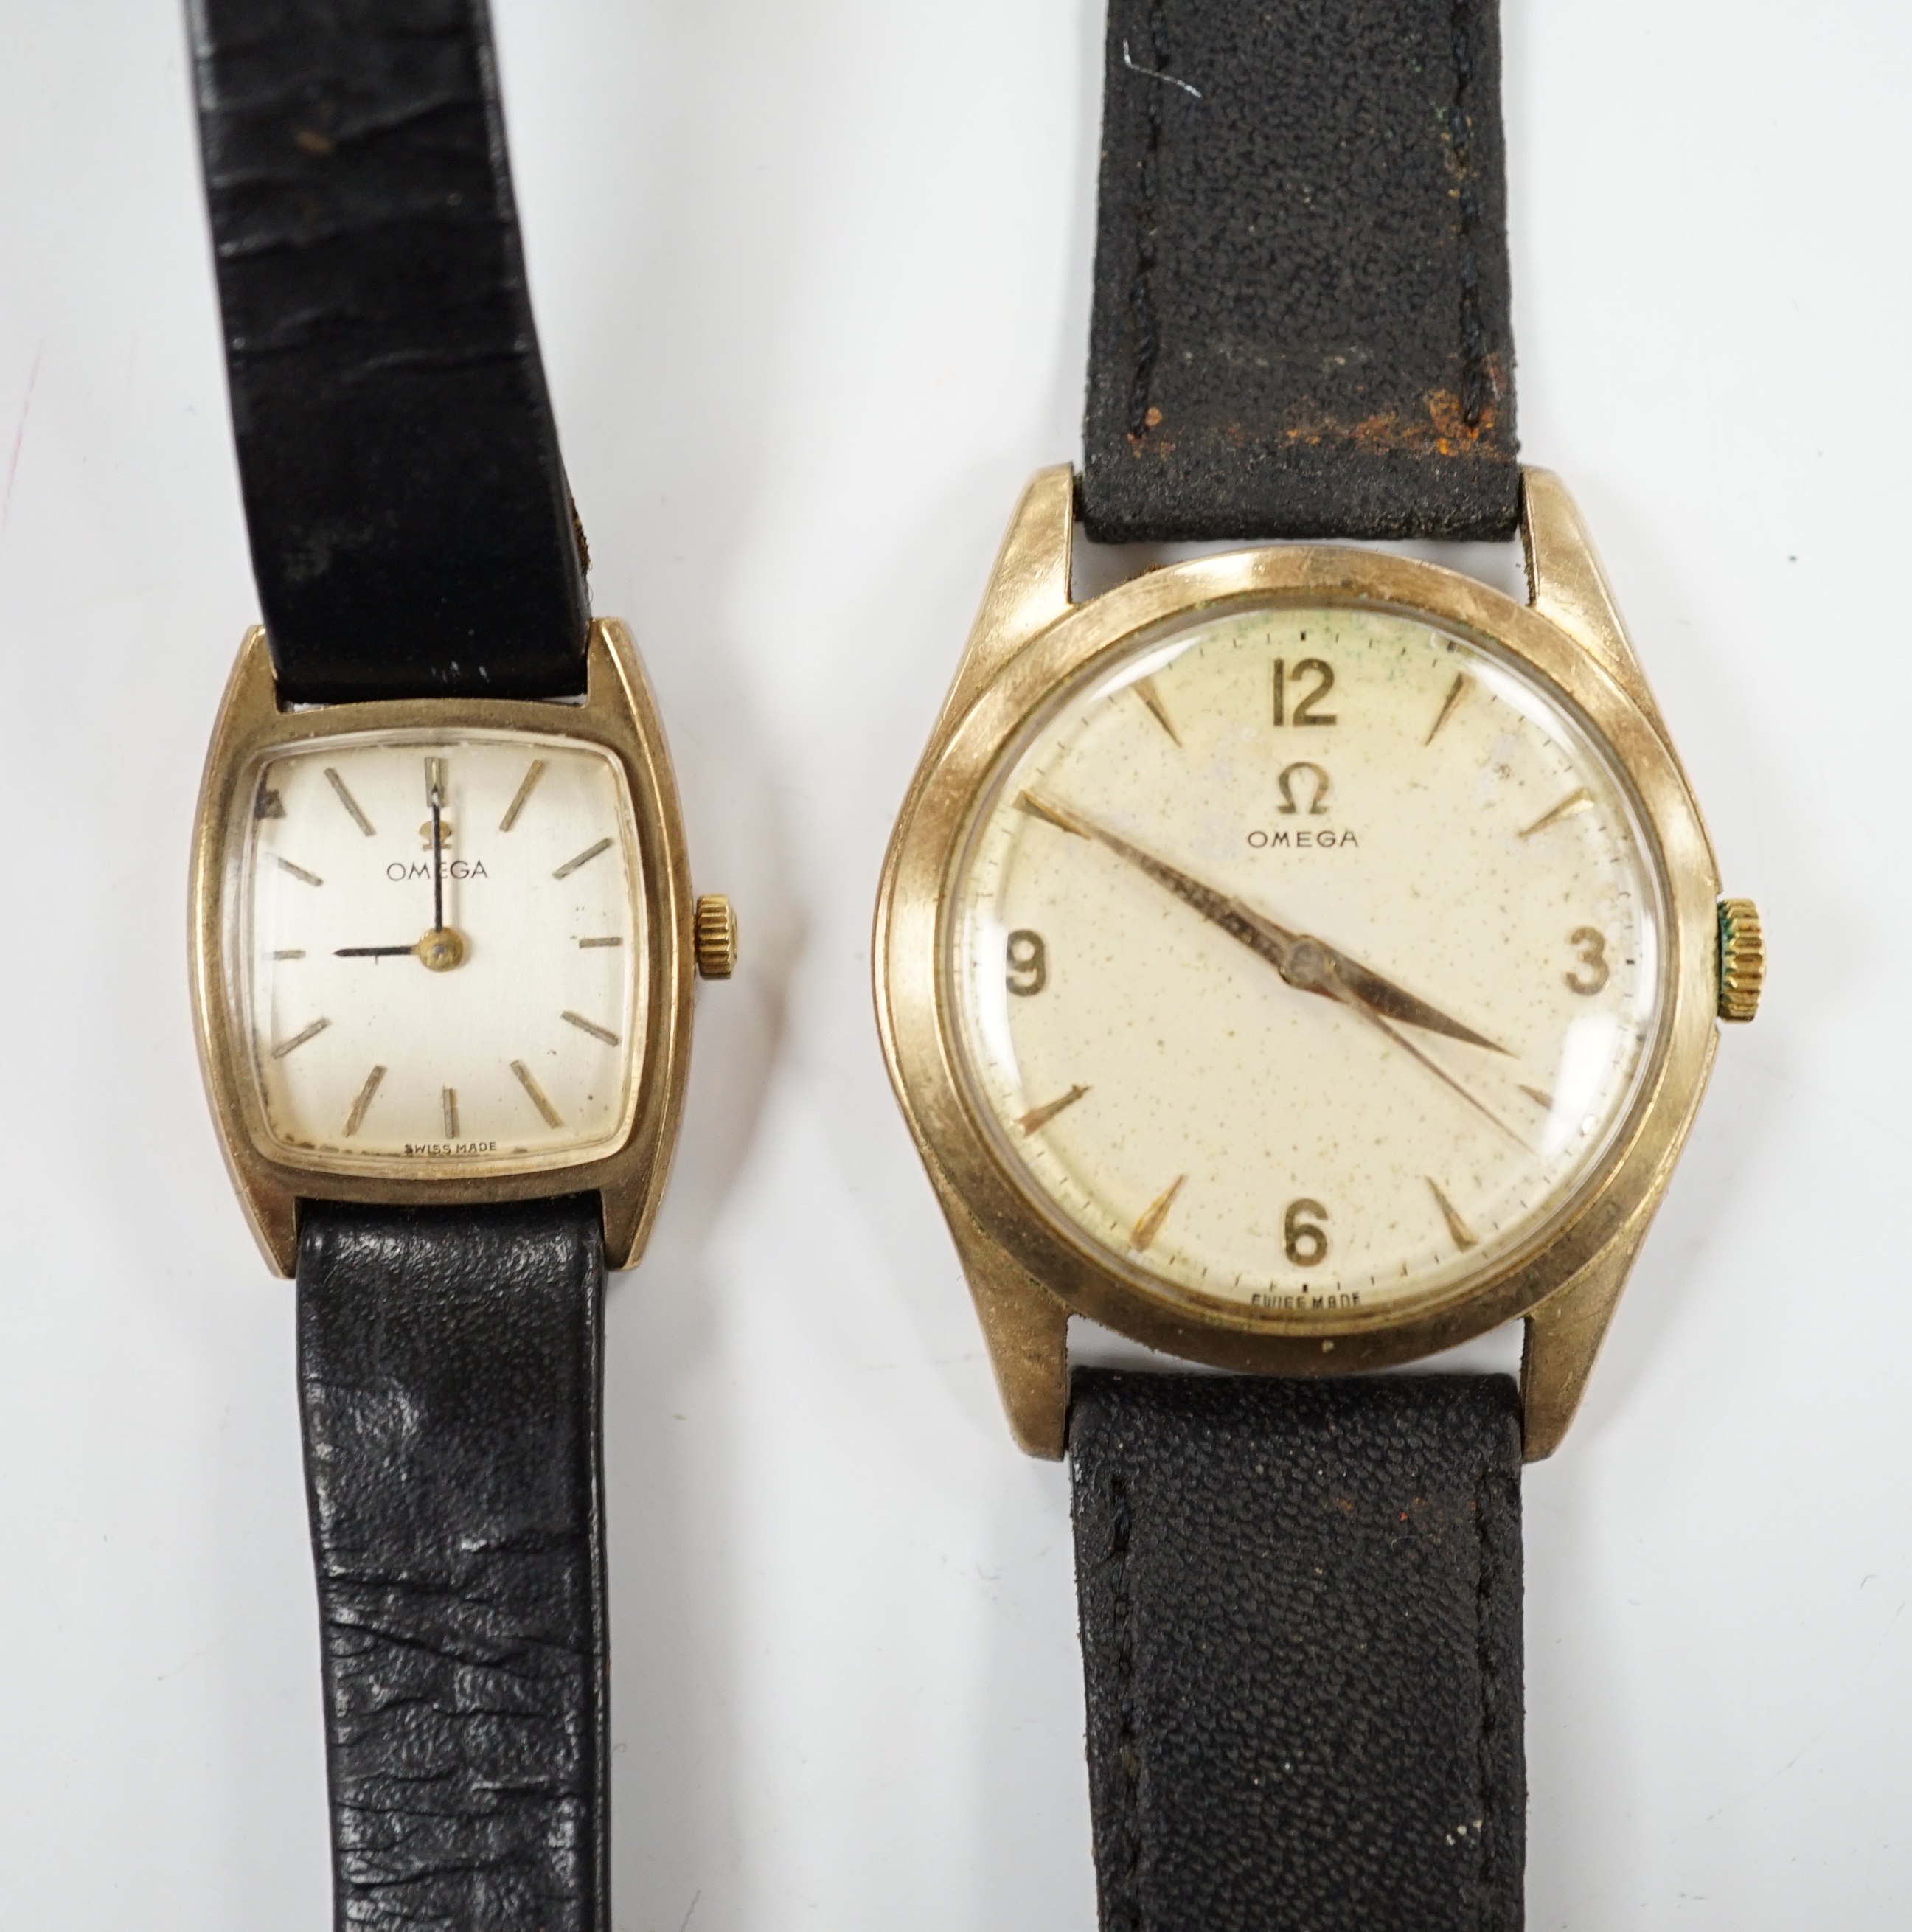 A gentleman's 9ct gold Omega manual wind wrist watch, on associated strap and a lady's 9ct gold Omega manual wind wrist watch.